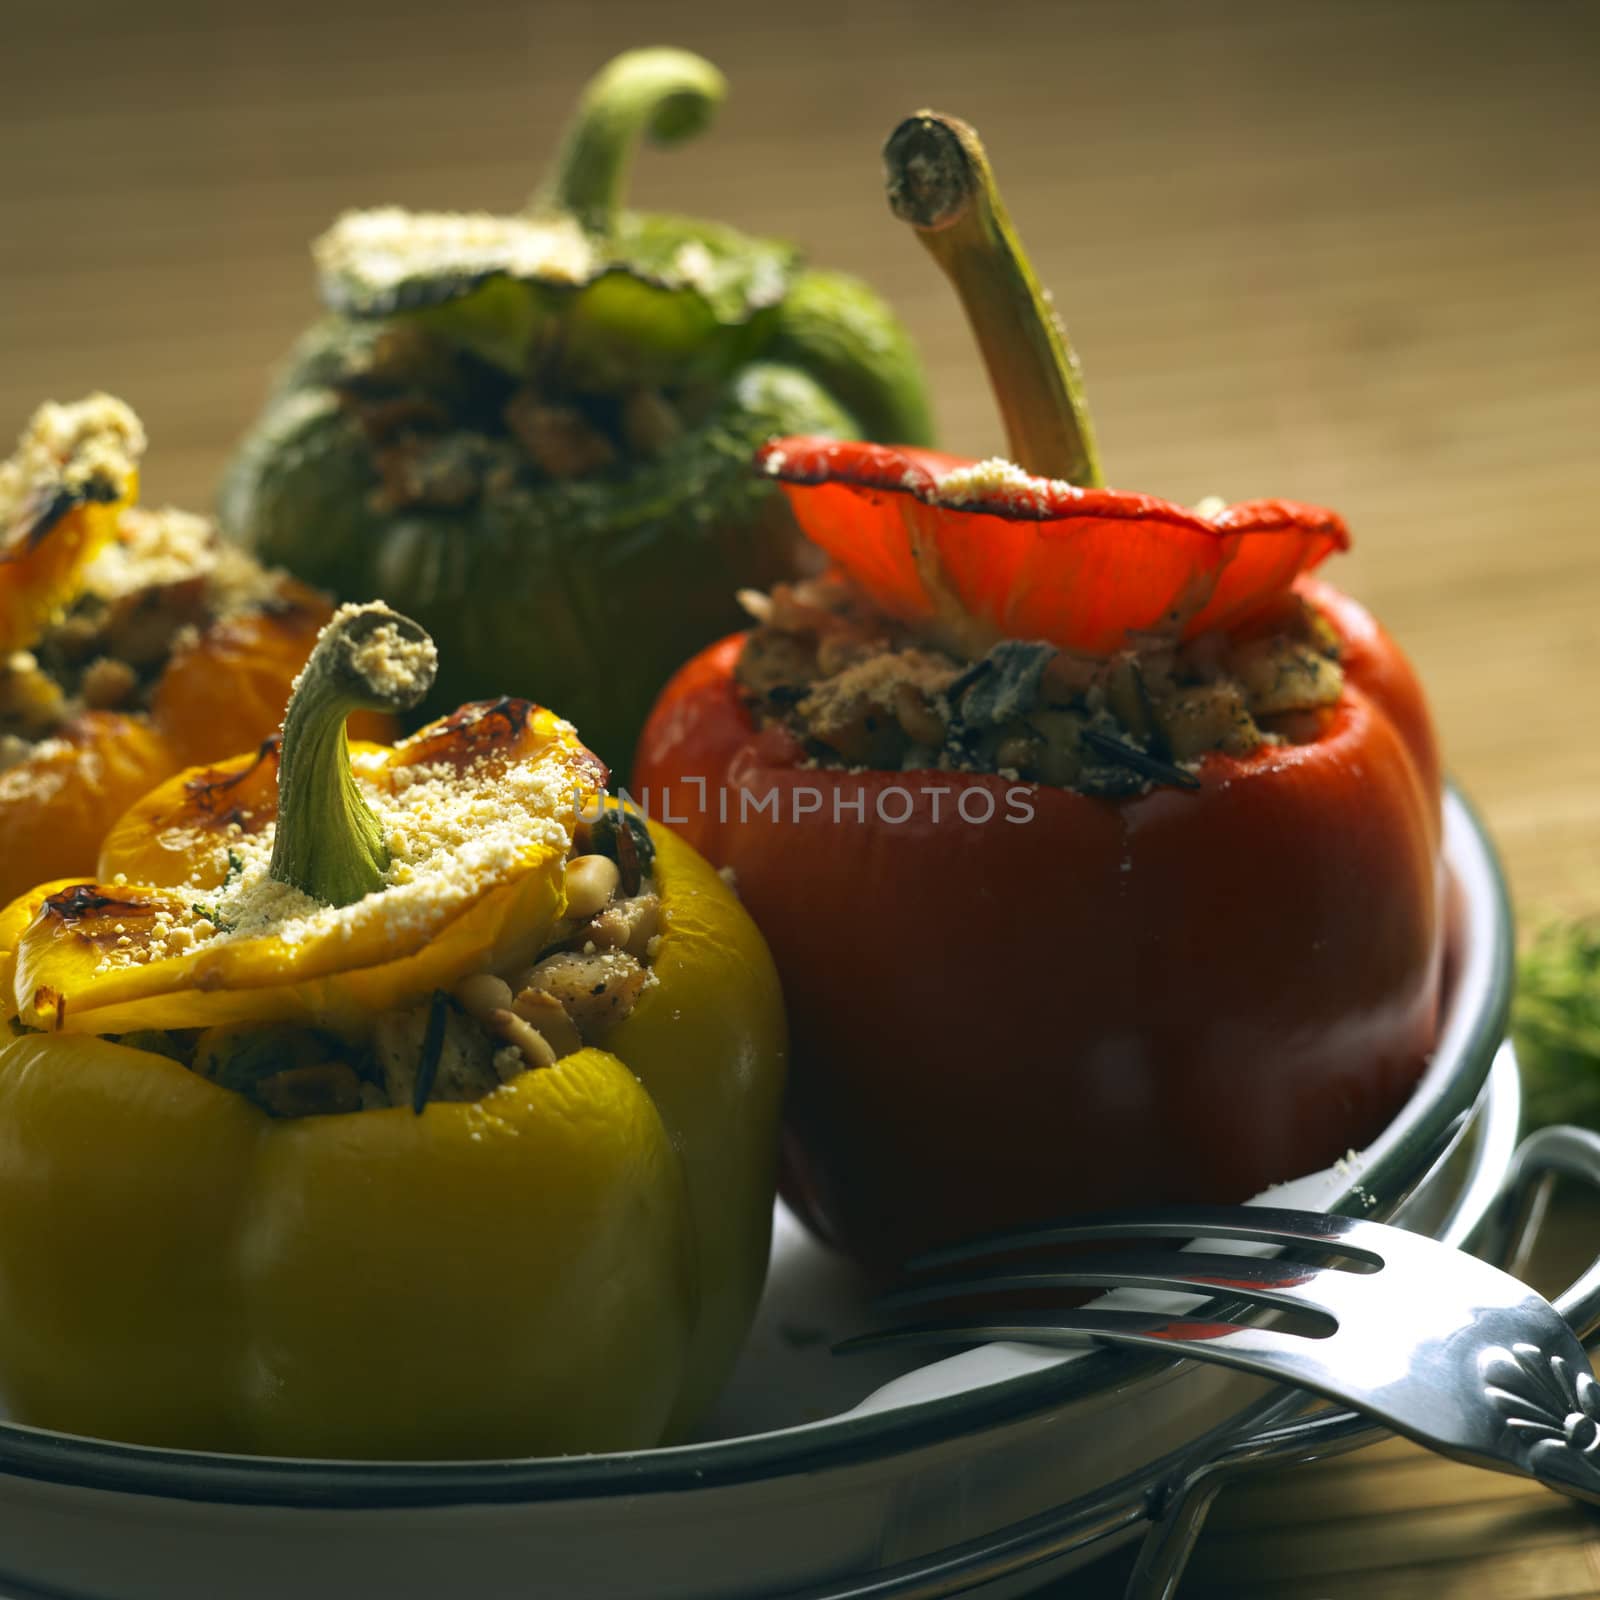 peppers filled with rice and chicken meat by phbcz